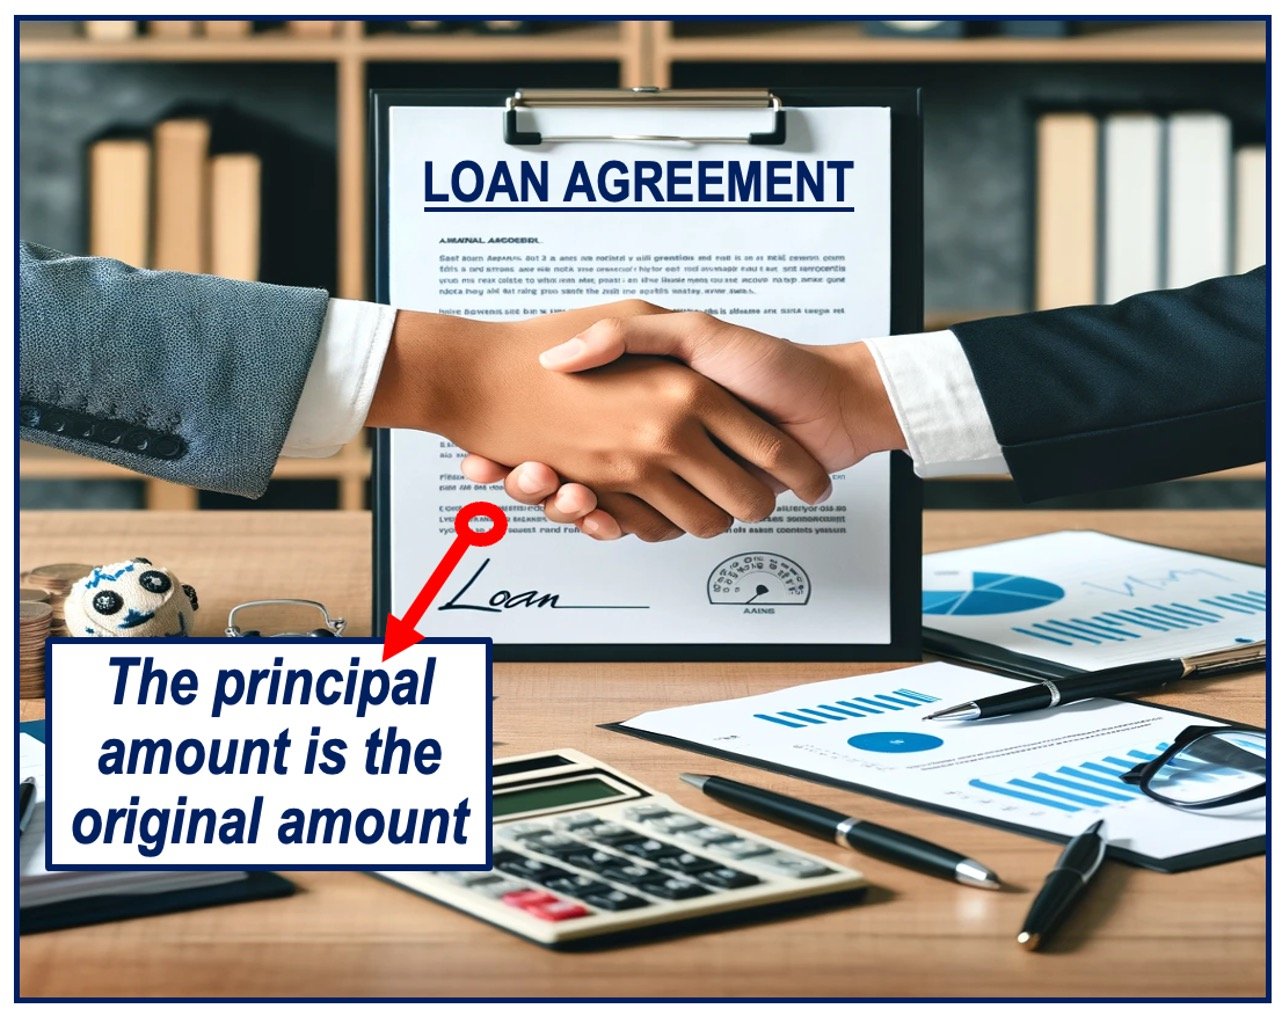 Depiction of a loan agreement, shaking hands, and definition of 'principal amount'